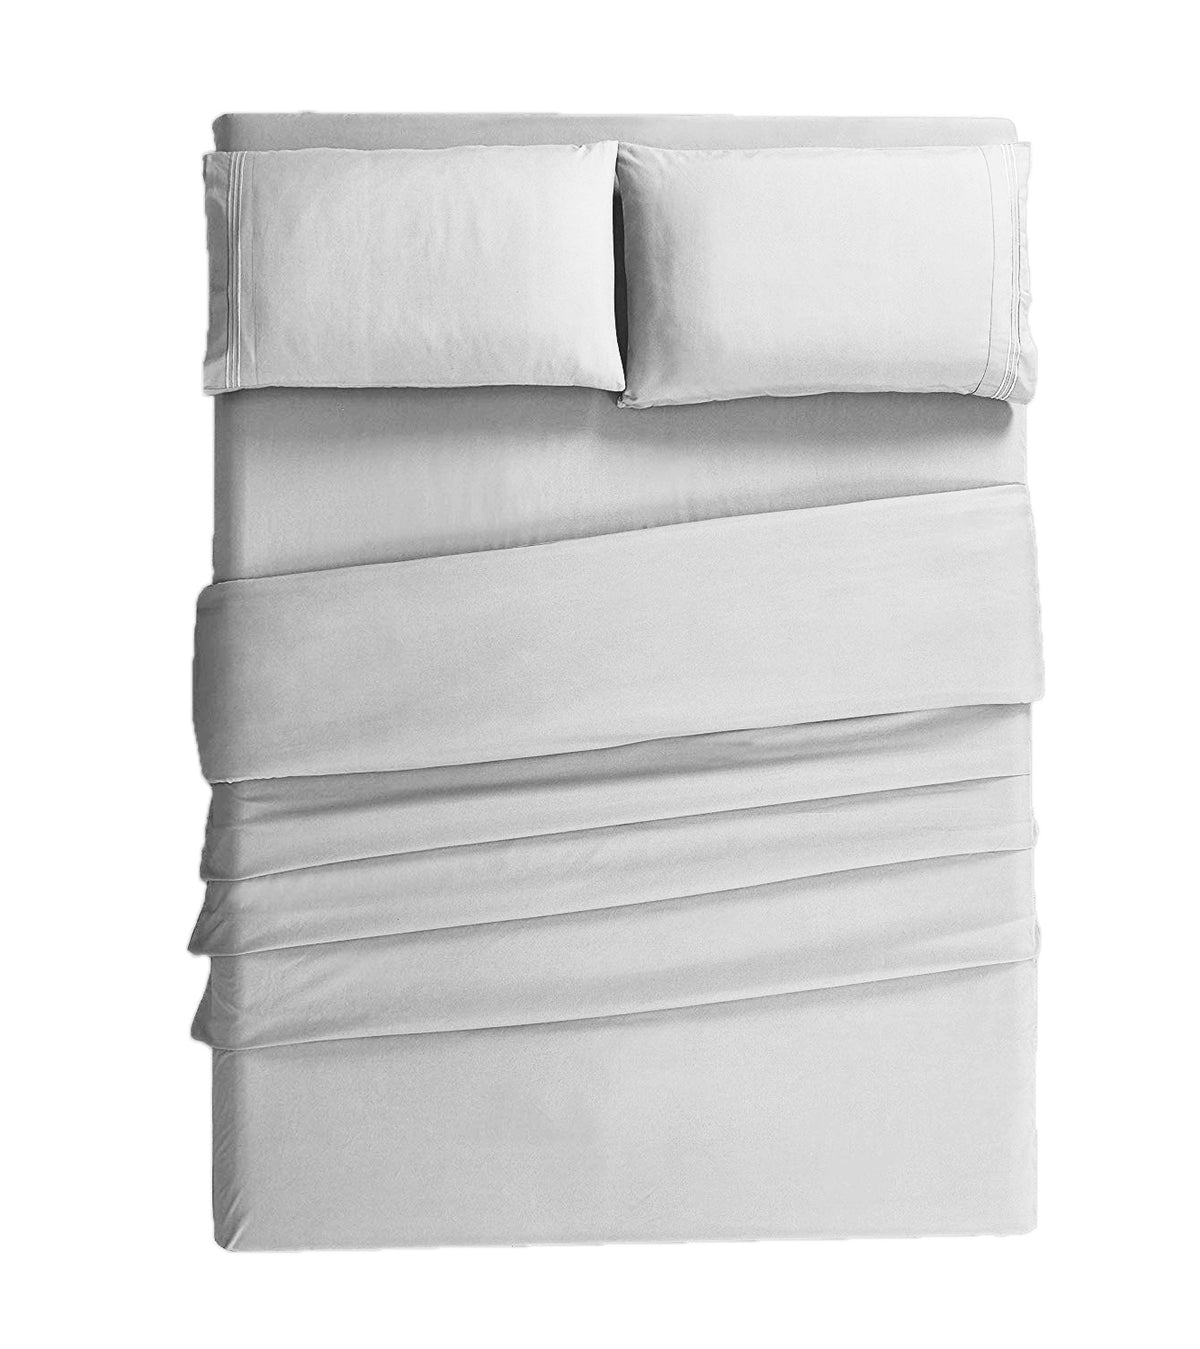 Marquess Microfiber Polyester Bed Sheet 4-Pc King Size Bedding Set (White/Gray)